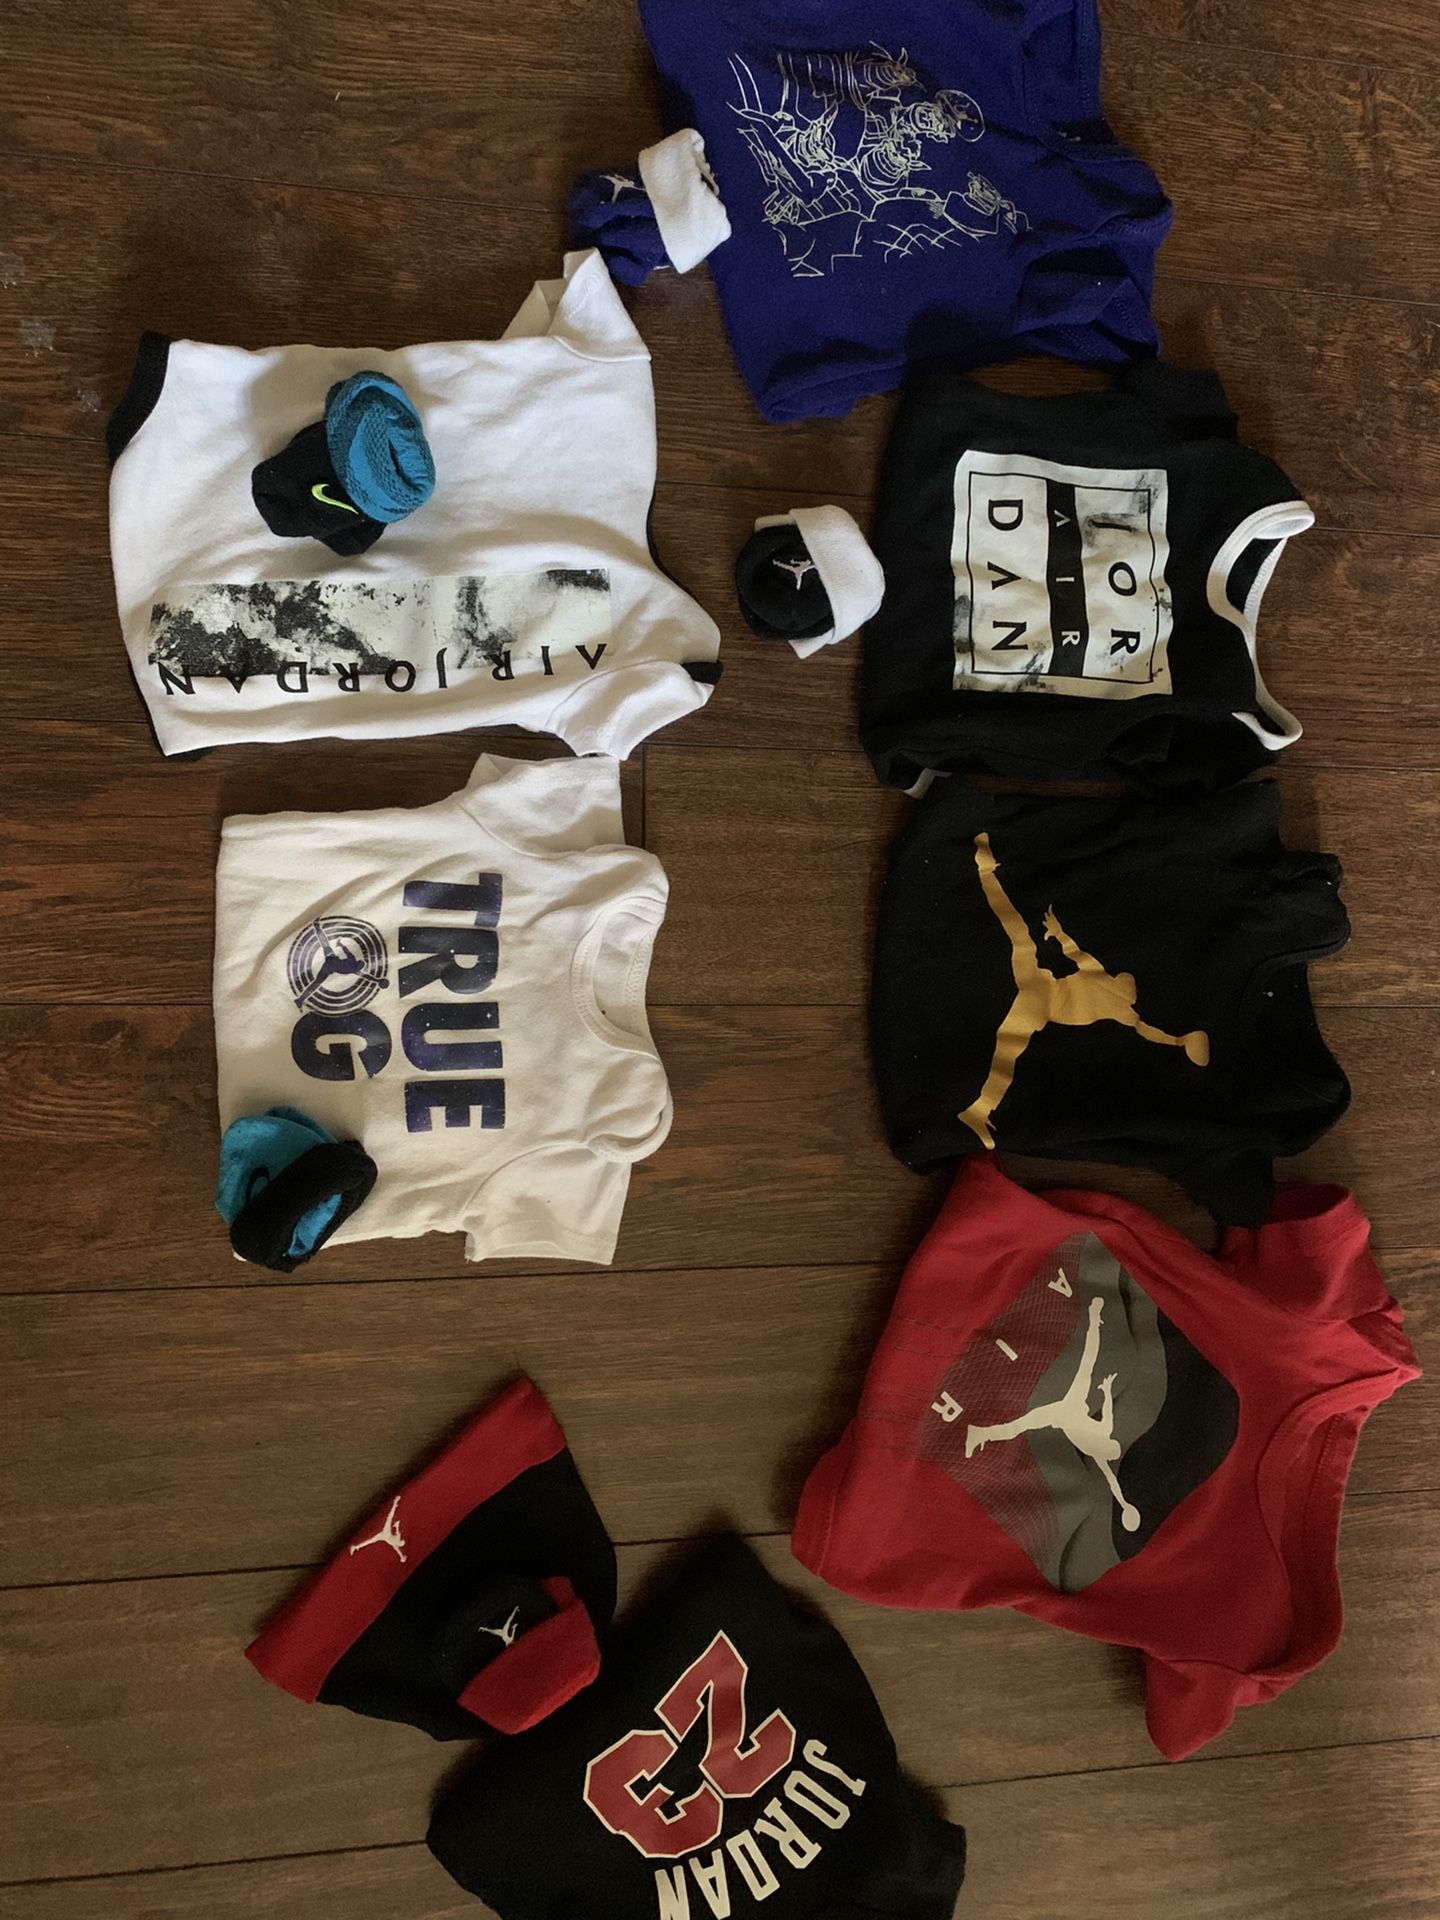 Baby Jordan 0-6 month outfits